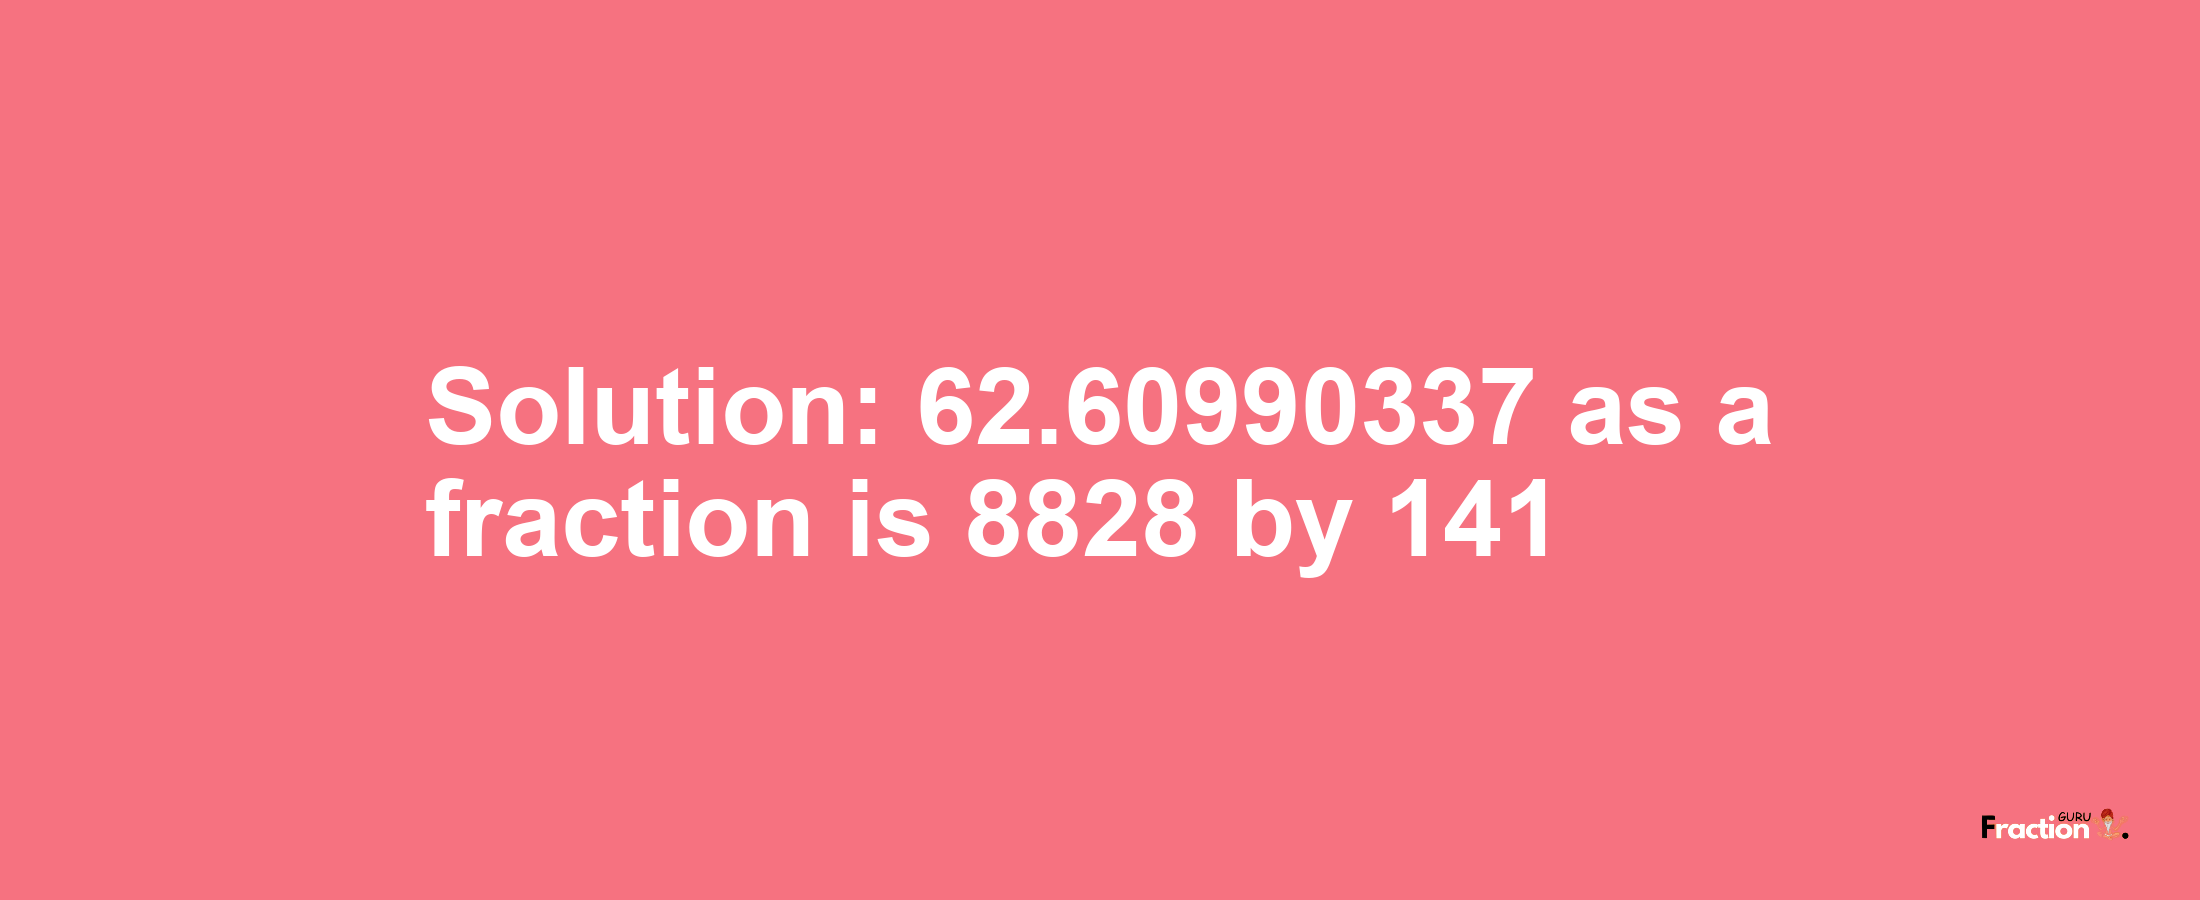 Solution:62.60990337 as a fraction is 8828/141